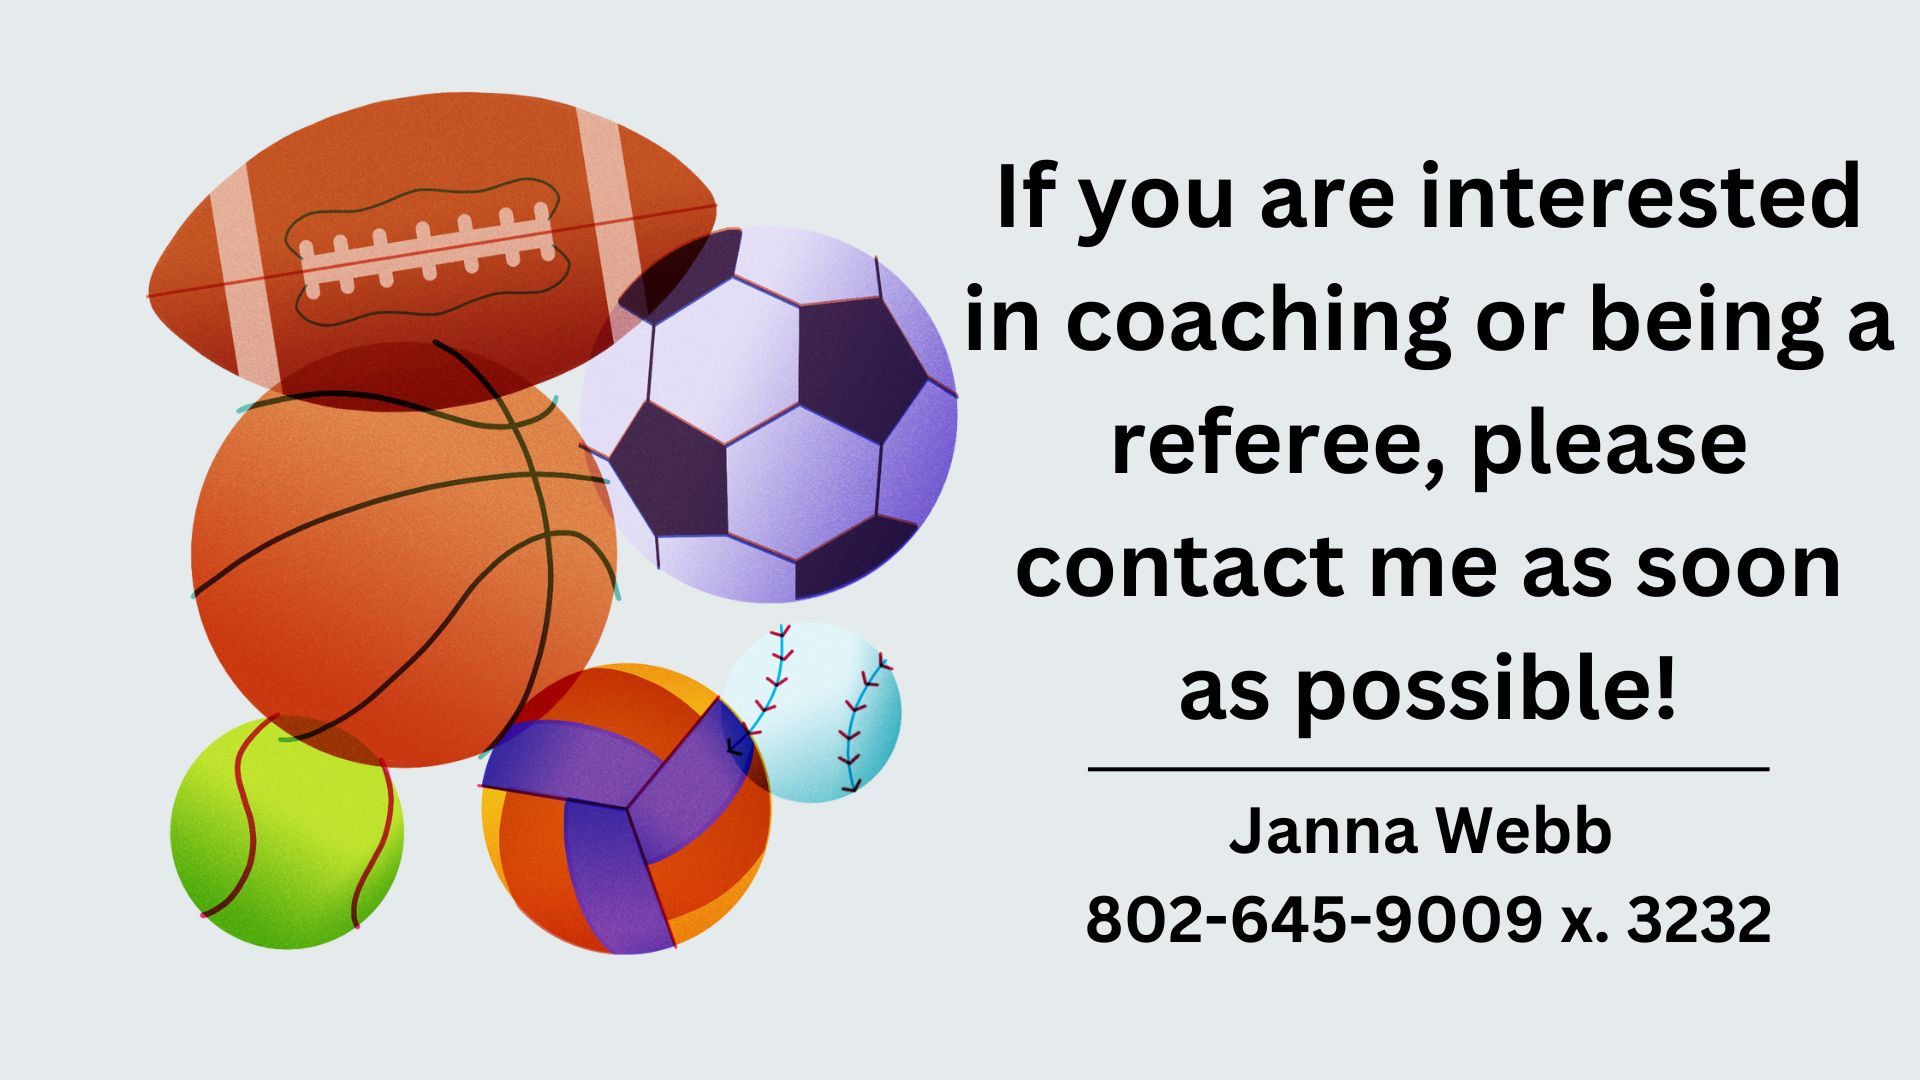 Interested in being a coach or referee, contact Janna Webb at 802-645-9009